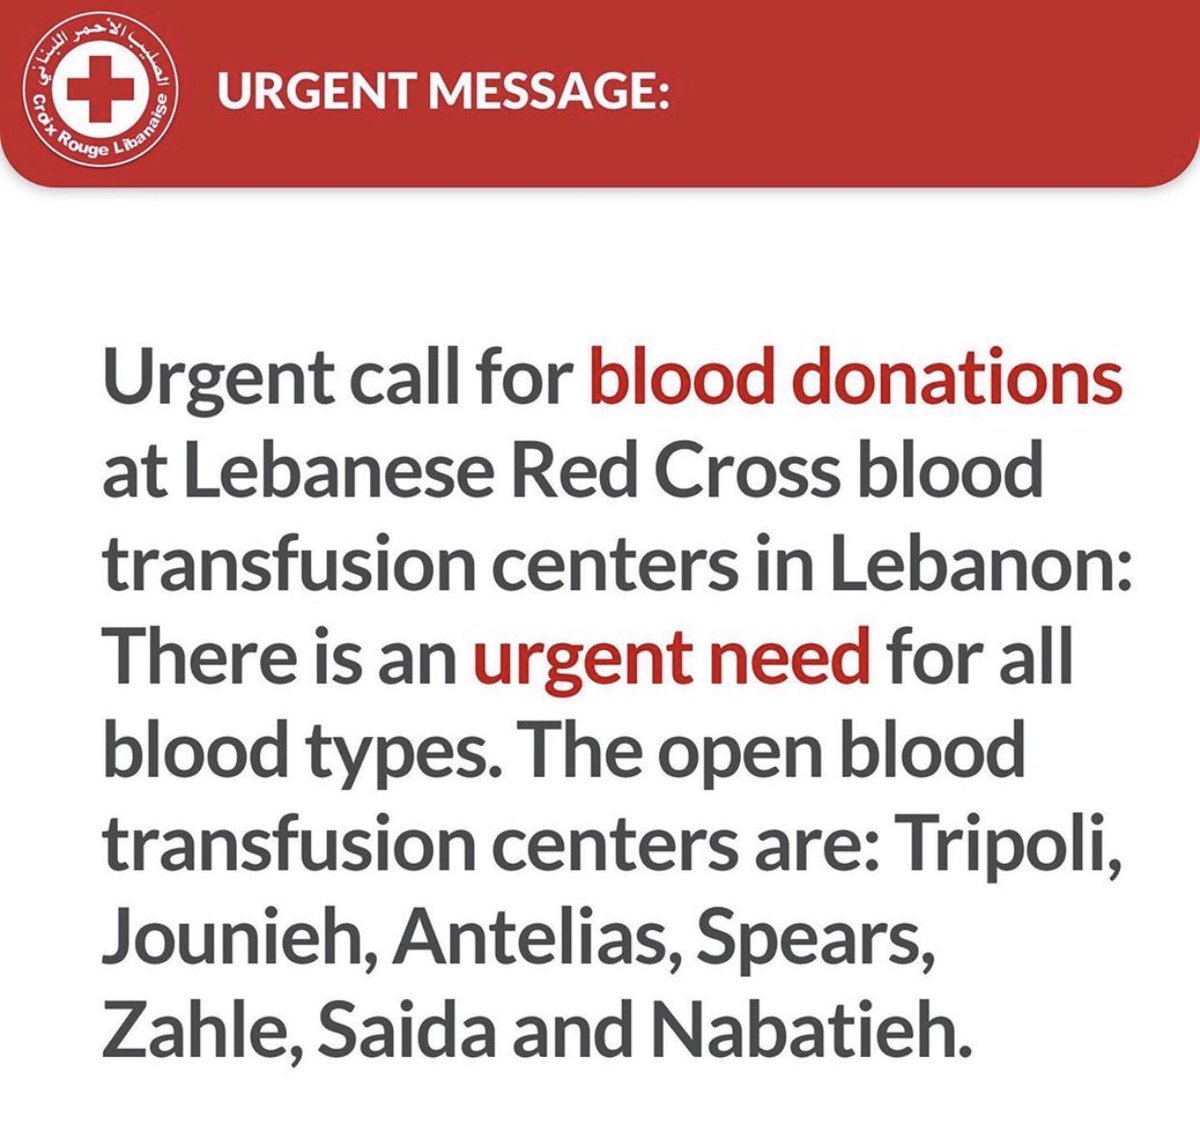 They currently have no electricity, even firefighters are missing, many have lost limbs, and the Lebanese Red Cross is in need of blood donations.